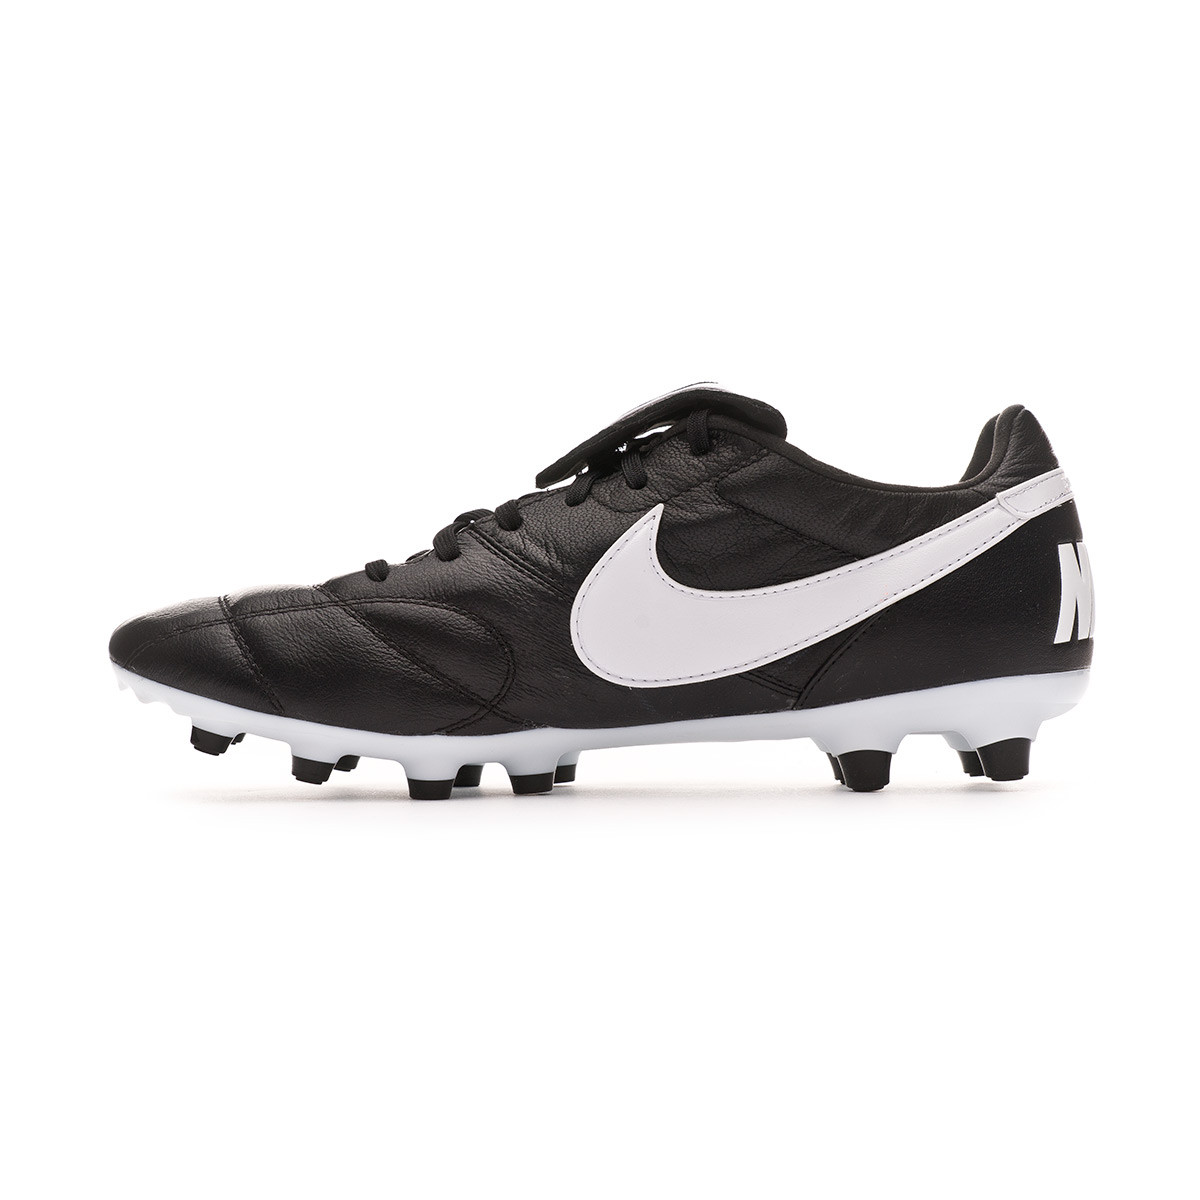 black leather football boots